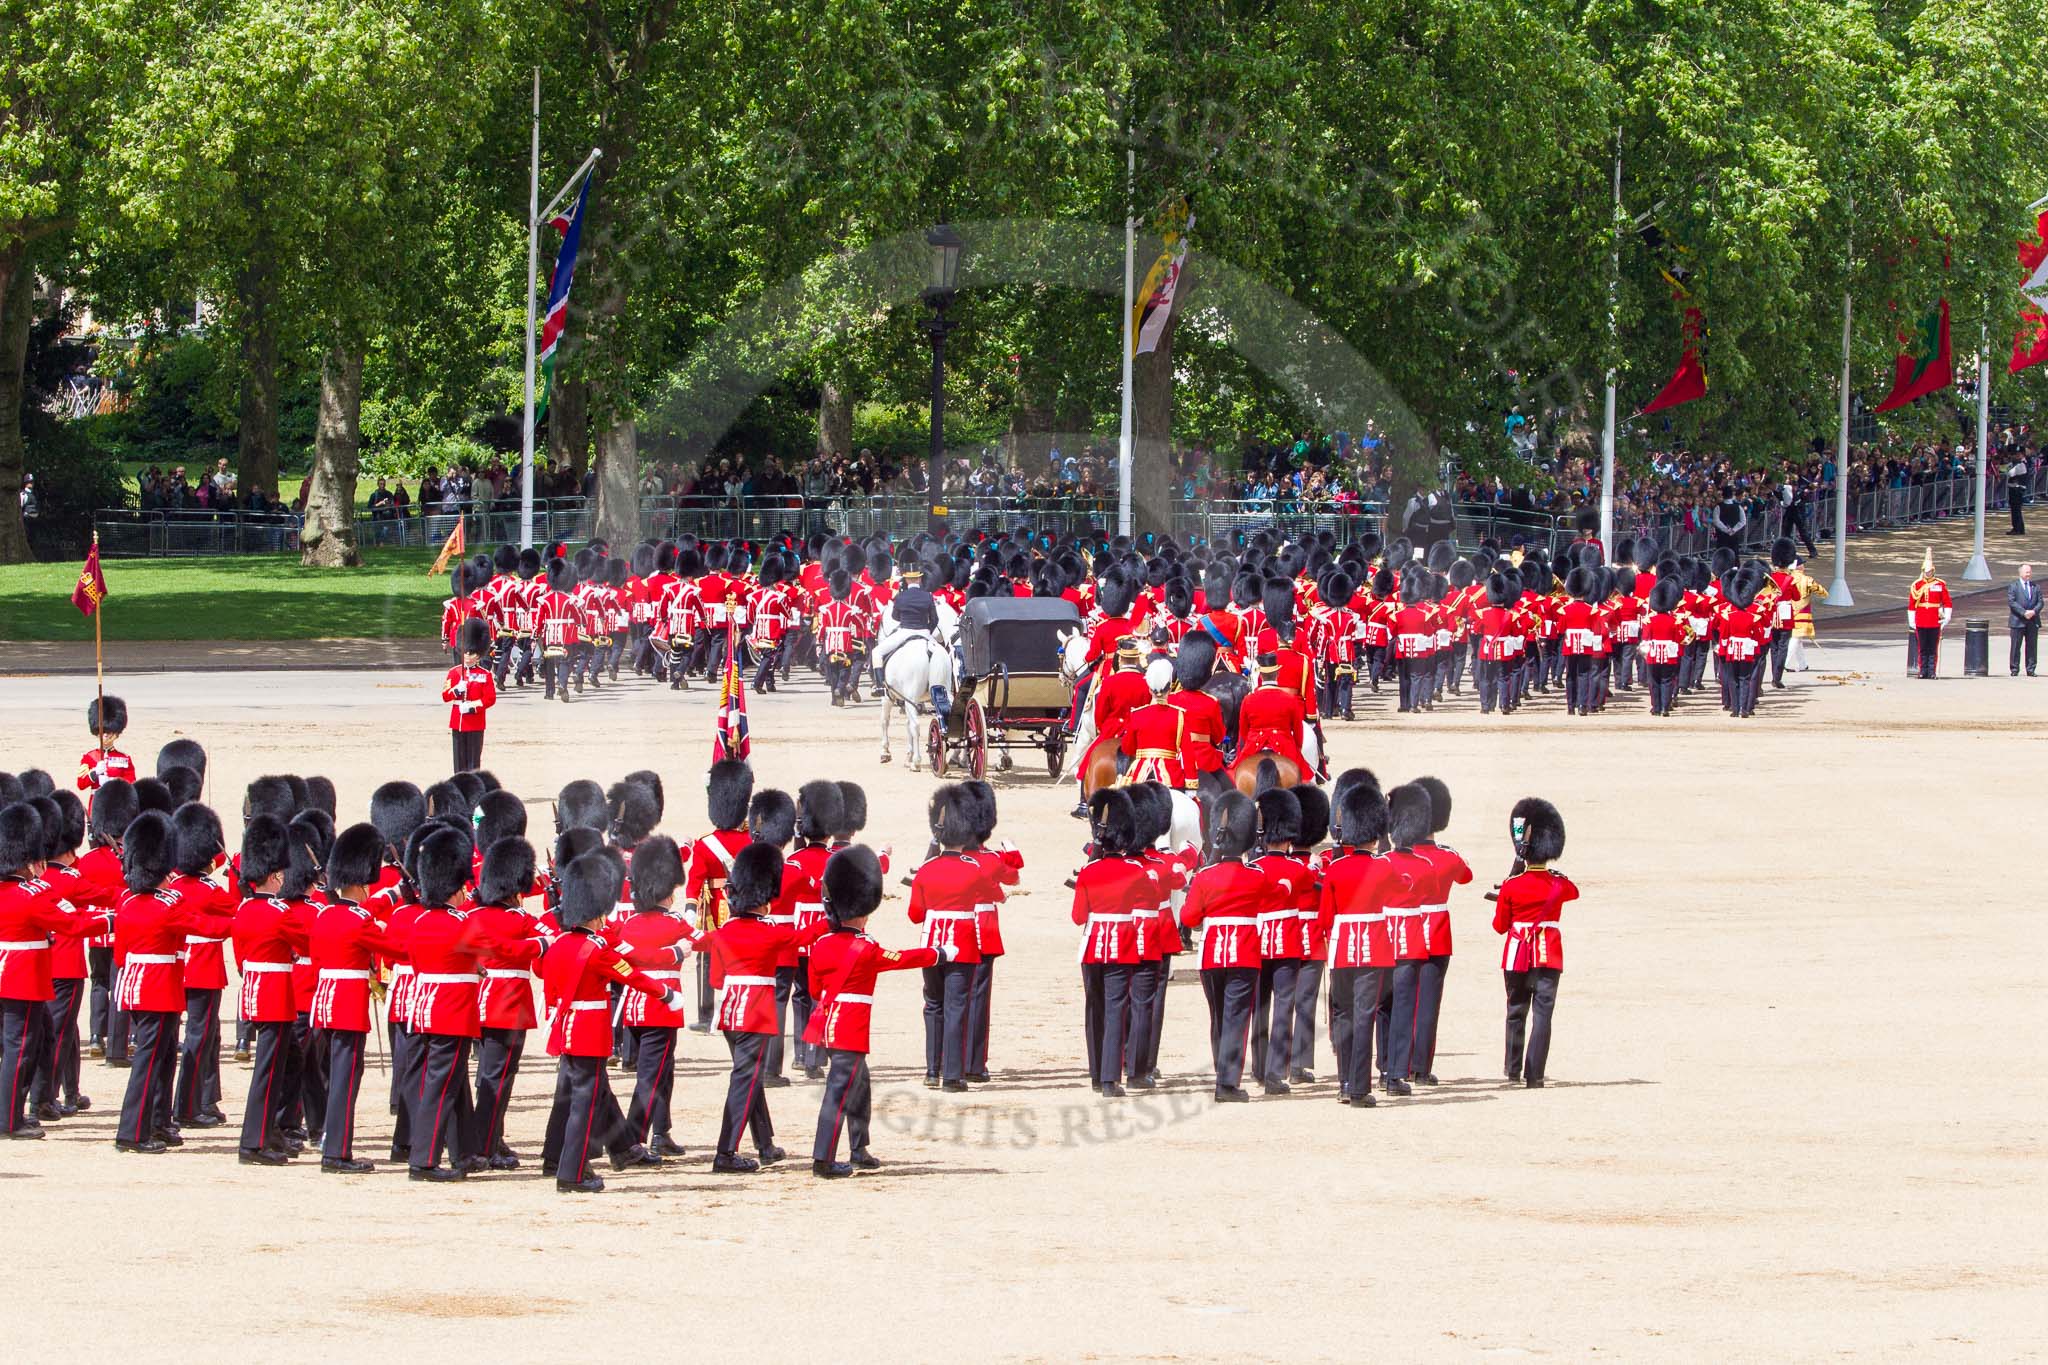 The Colonel's Review 2013.
Horse Guards Parade, Westminster,
London SW1,

United Kingdom,
on 08 June 2013 at 12:10, image #852